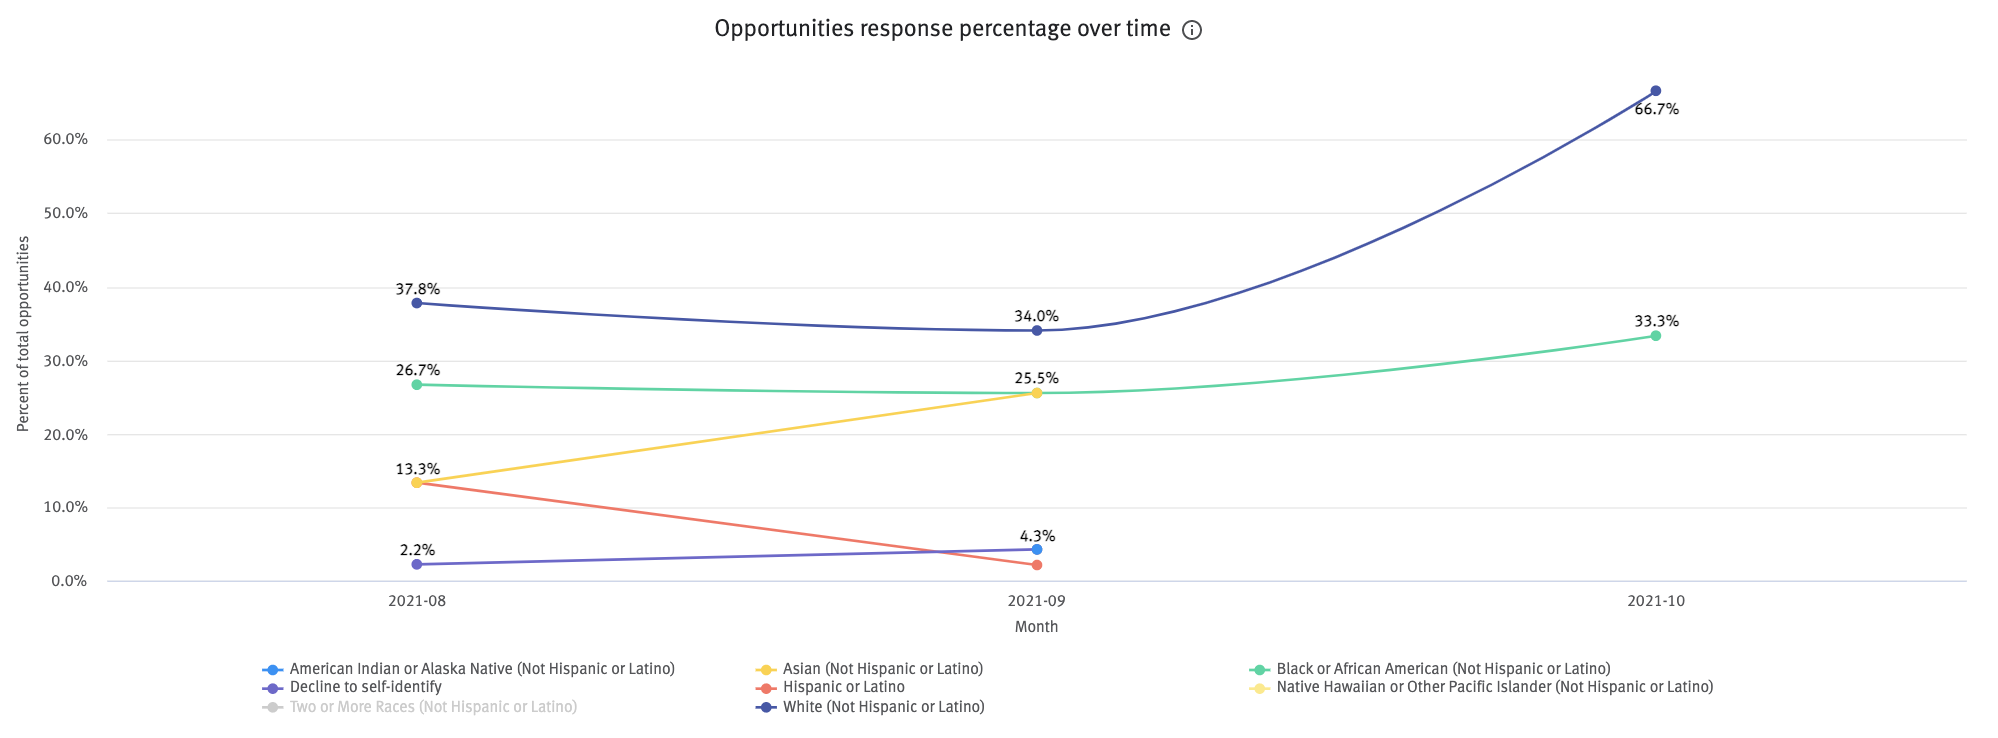 Opportunities response percentage over time chart